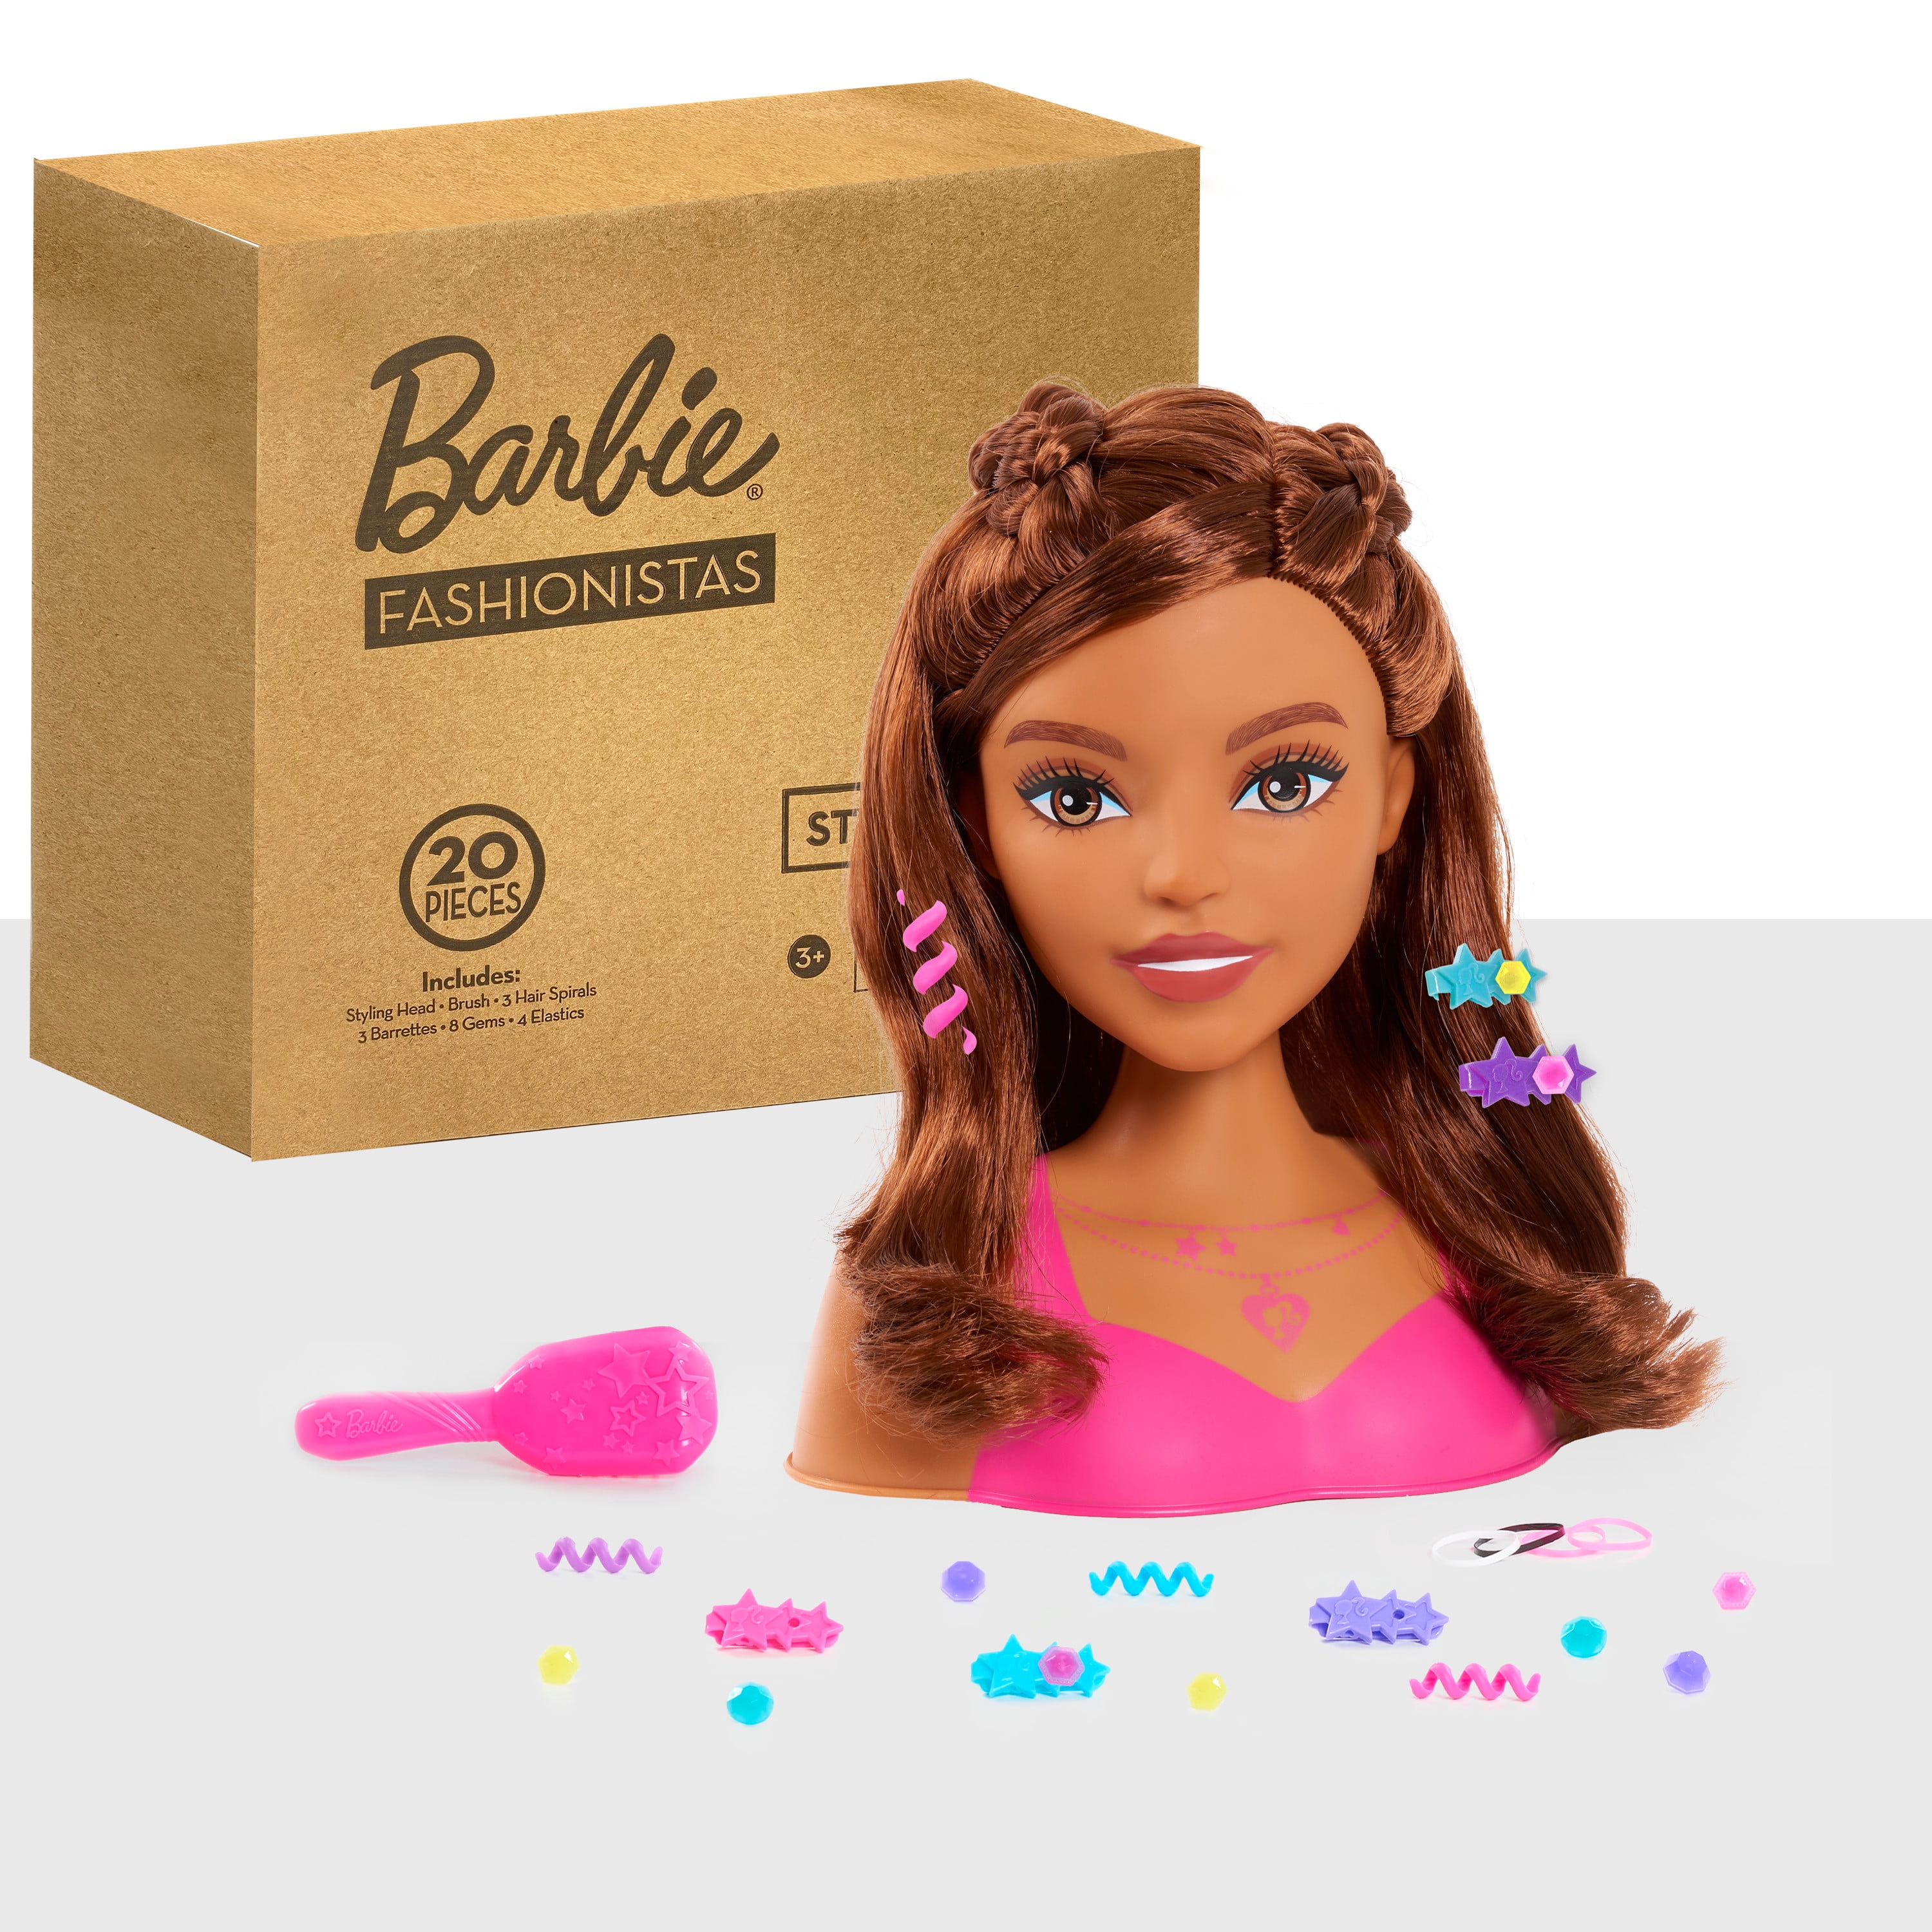 Barbie Fashionistas 8-Inch Styling Head, Brown Hair, 20 Pieces Include Styling Accessories, Hair Styling for Kids, by Just Play